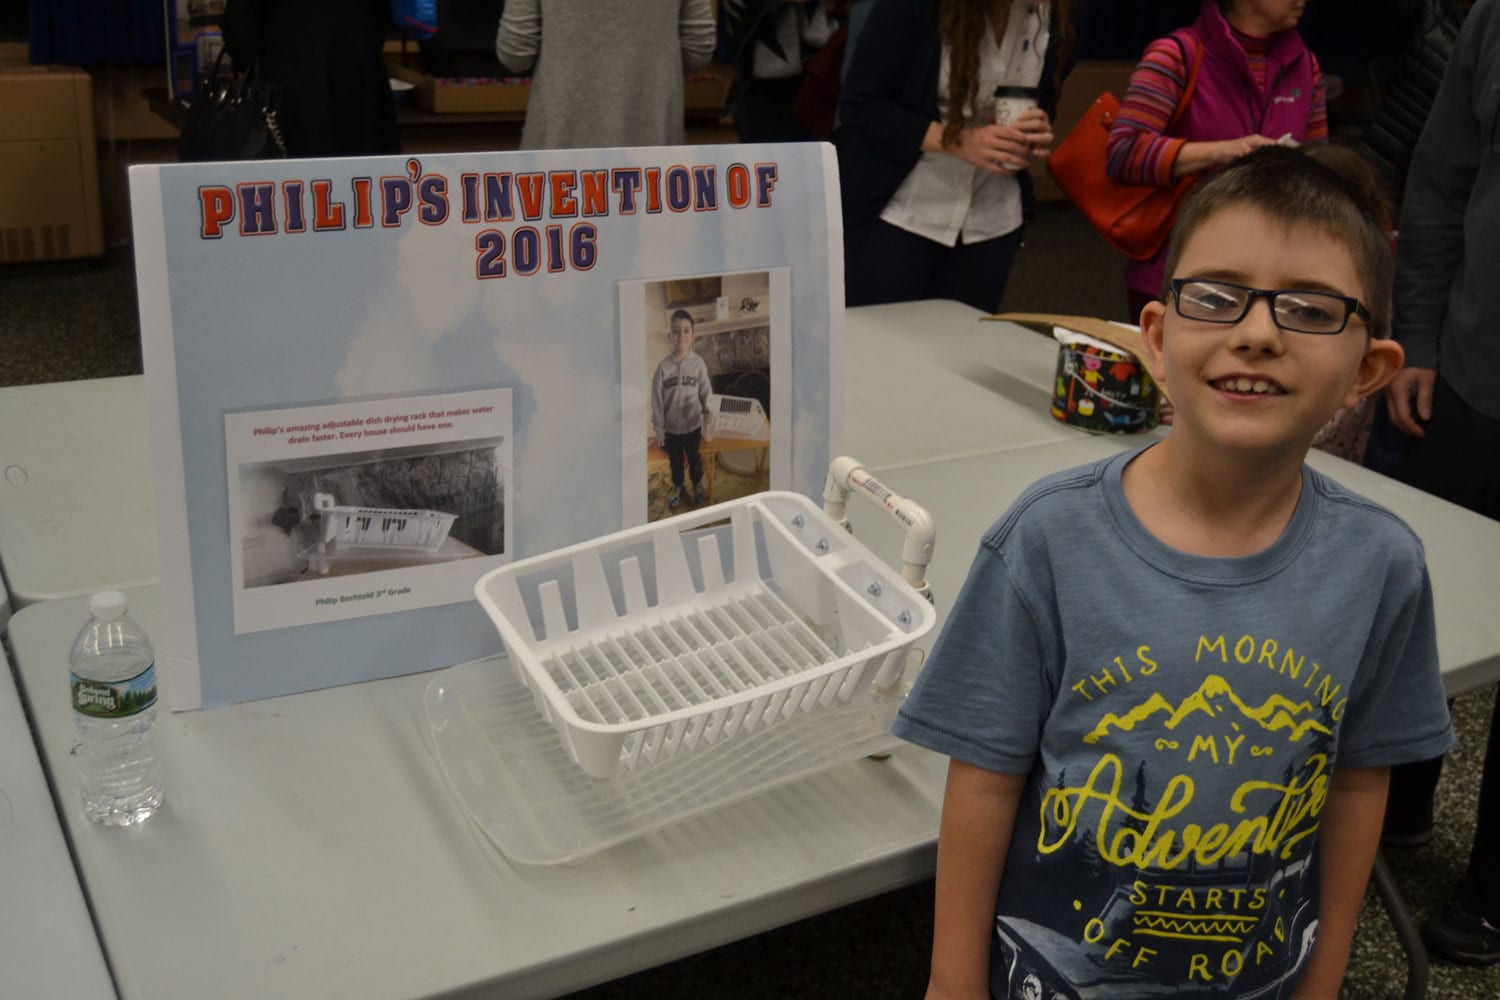 invention convention full of fresh ideas from young minds - tbr news